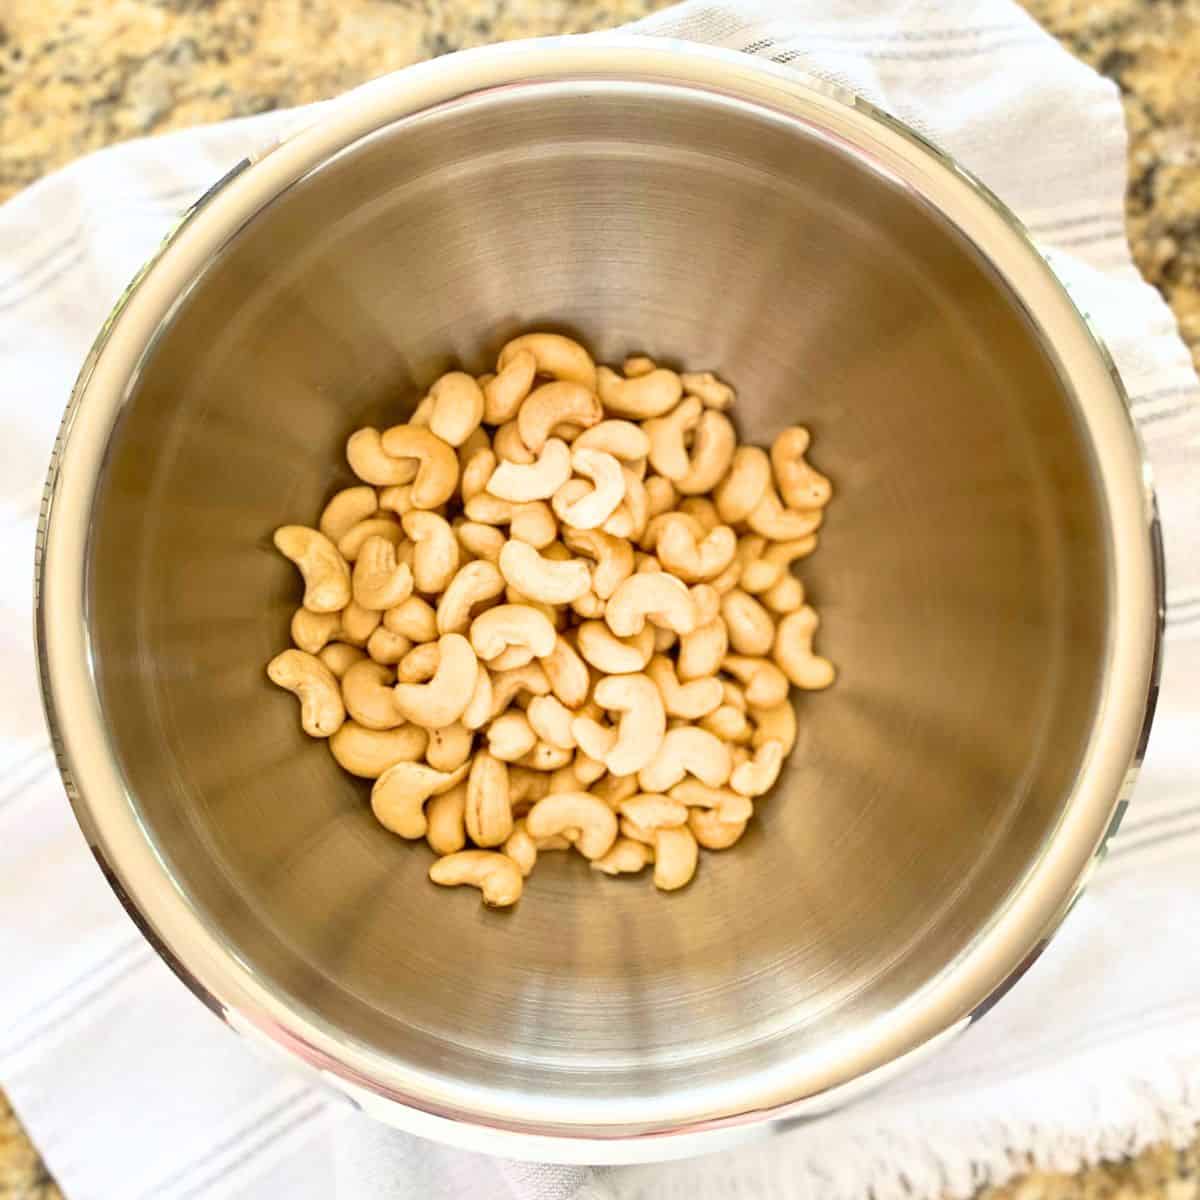 Raw cashews in a stainless steel mixing bowl